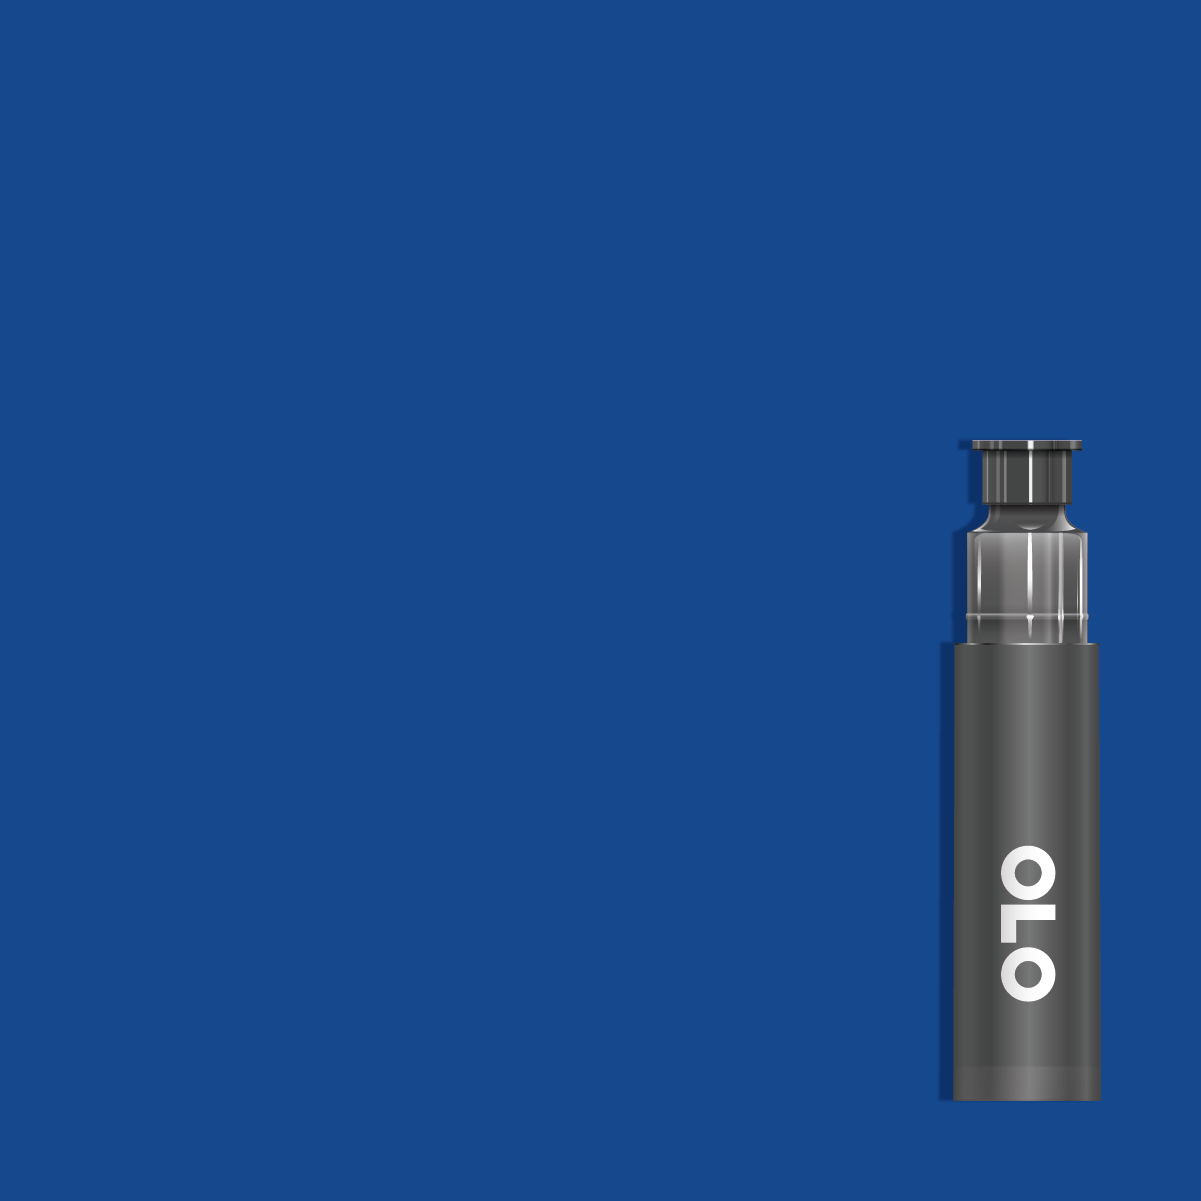 OLO B0.5 Blue Sapphire Replacement Cartridge